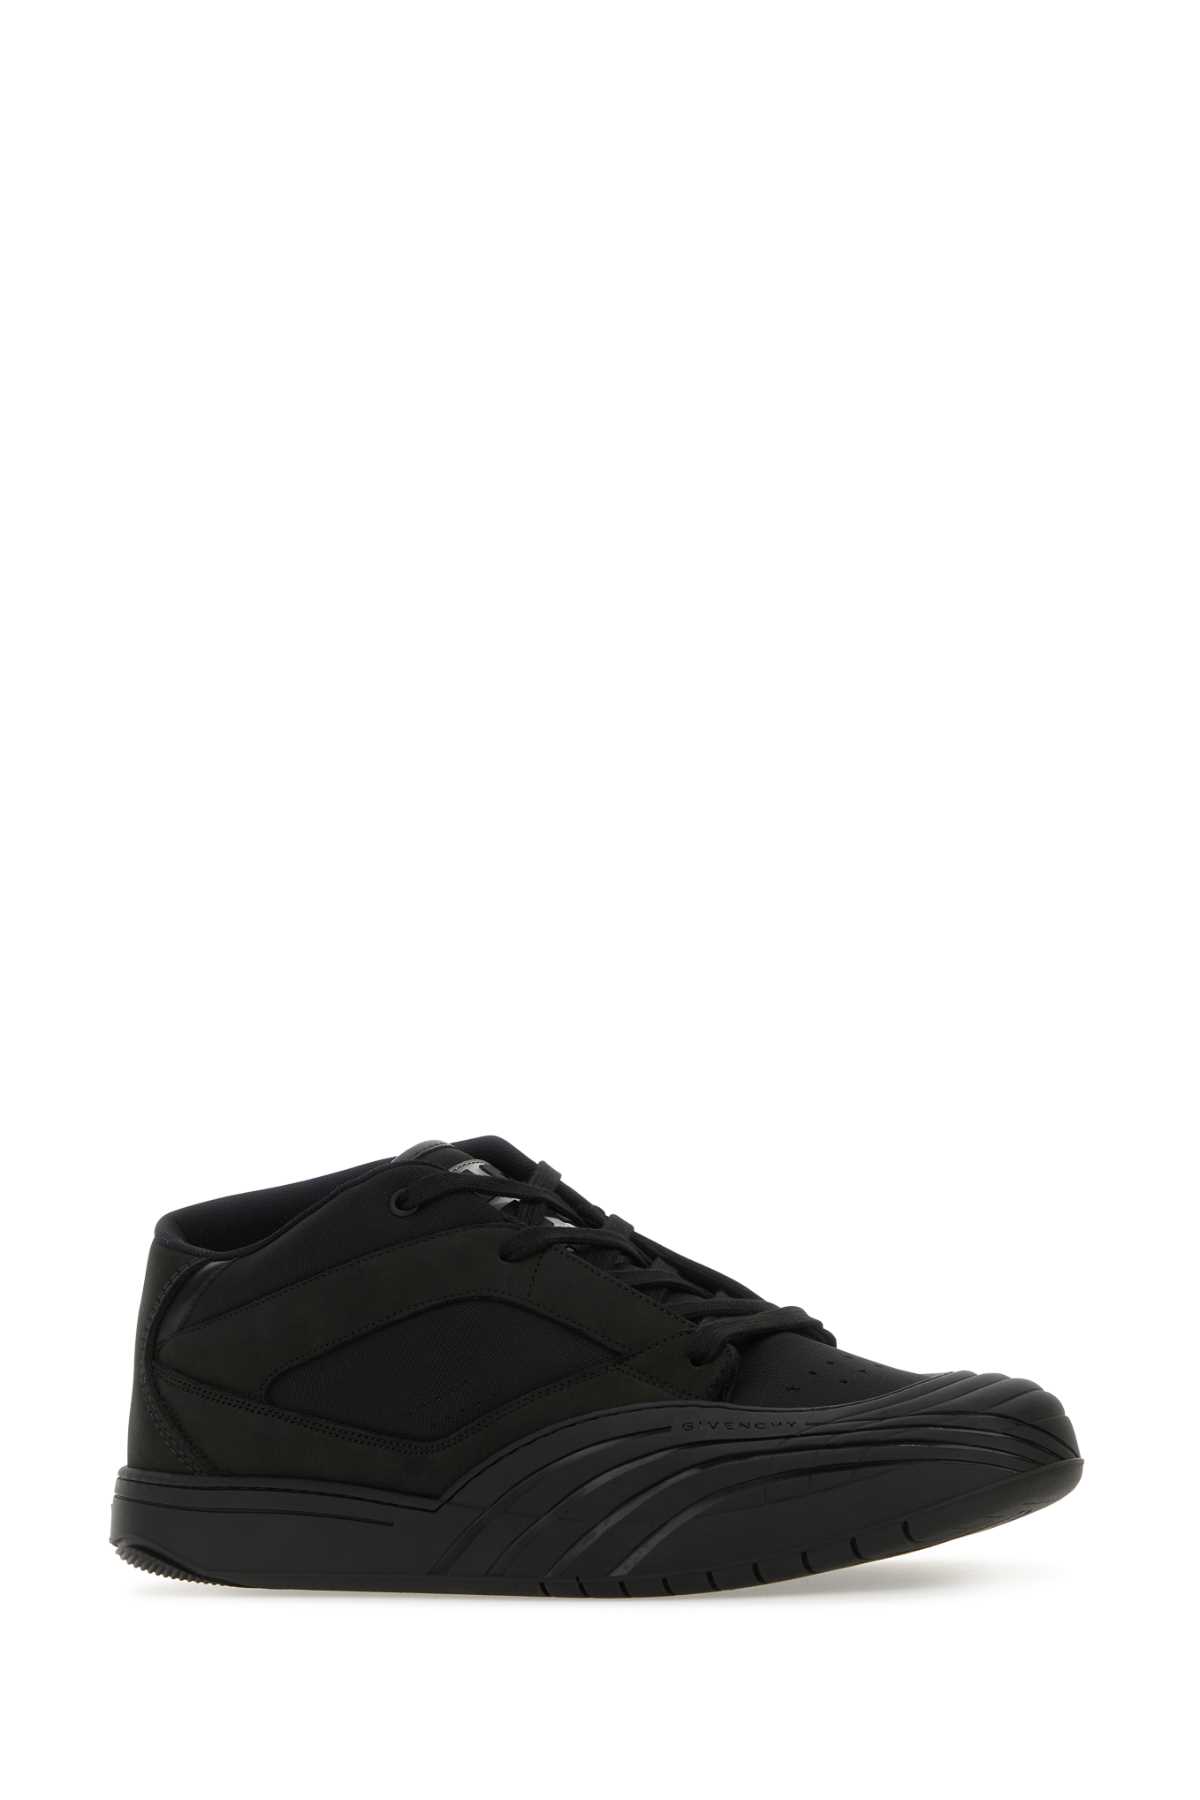 Shop Givenchy Black Fabric And Leather Skate Sneakers